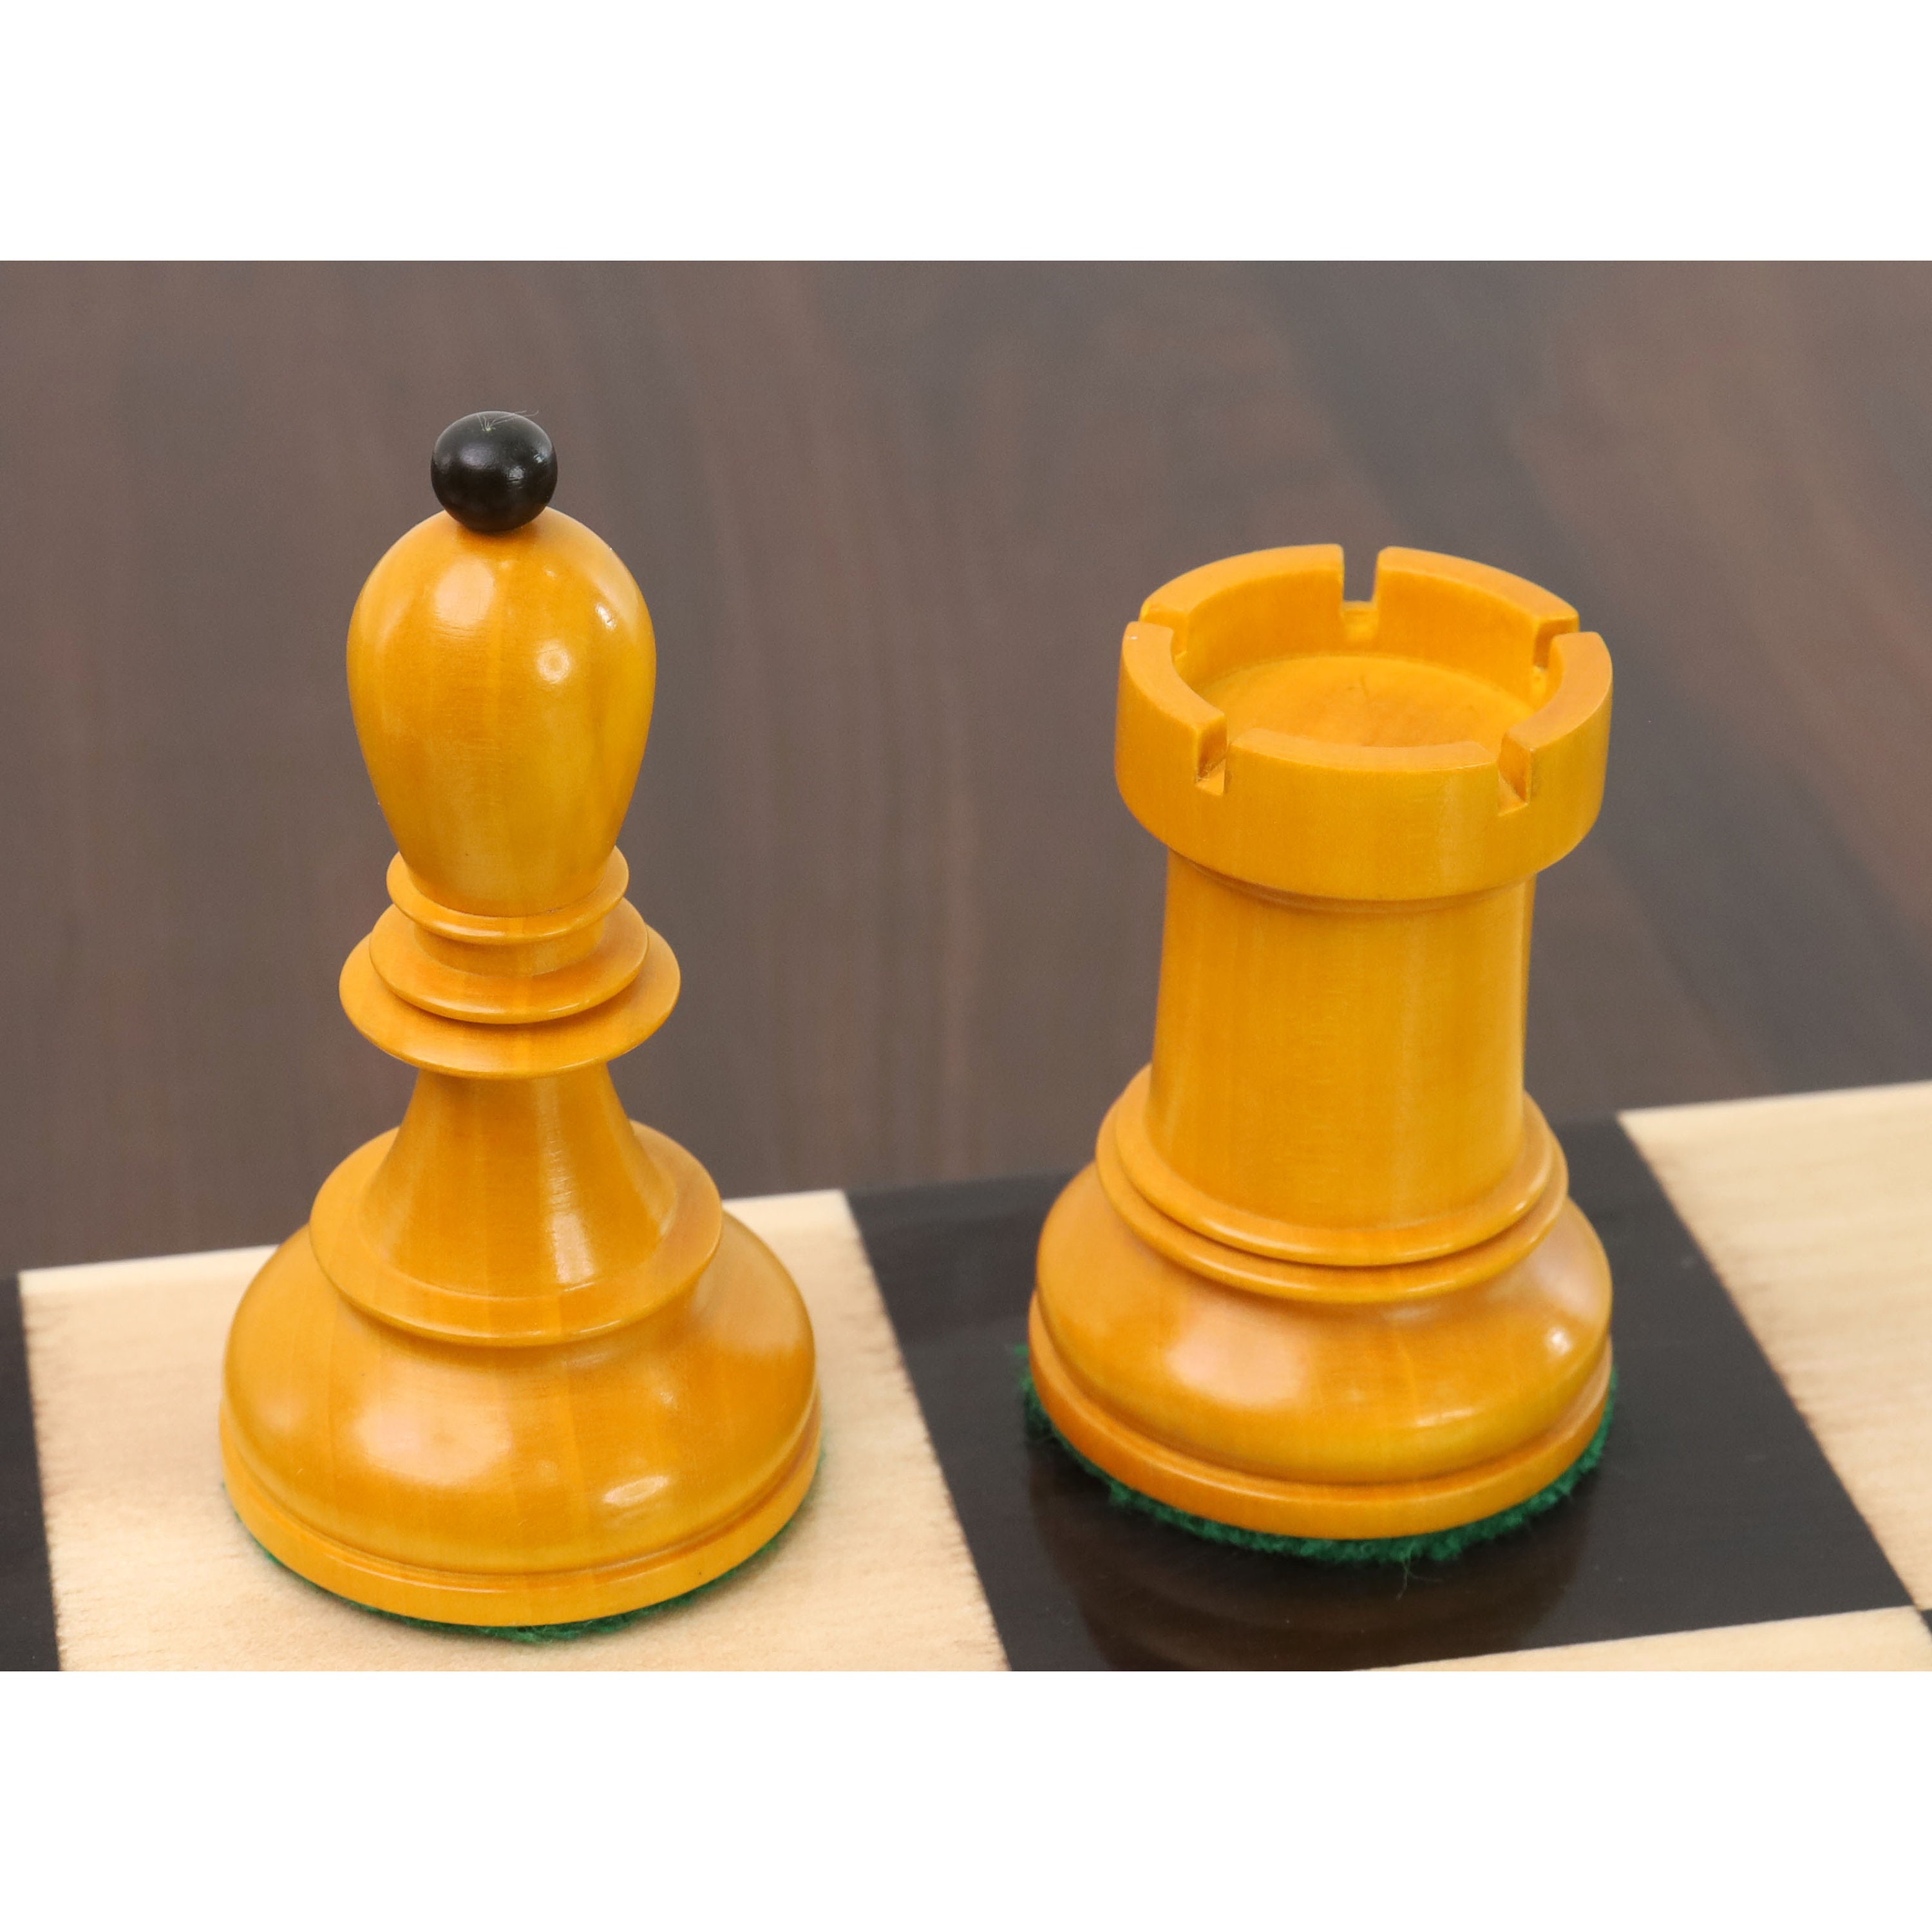 3.1 Library Series Staunton Chess Pieces Only – royalchessmall